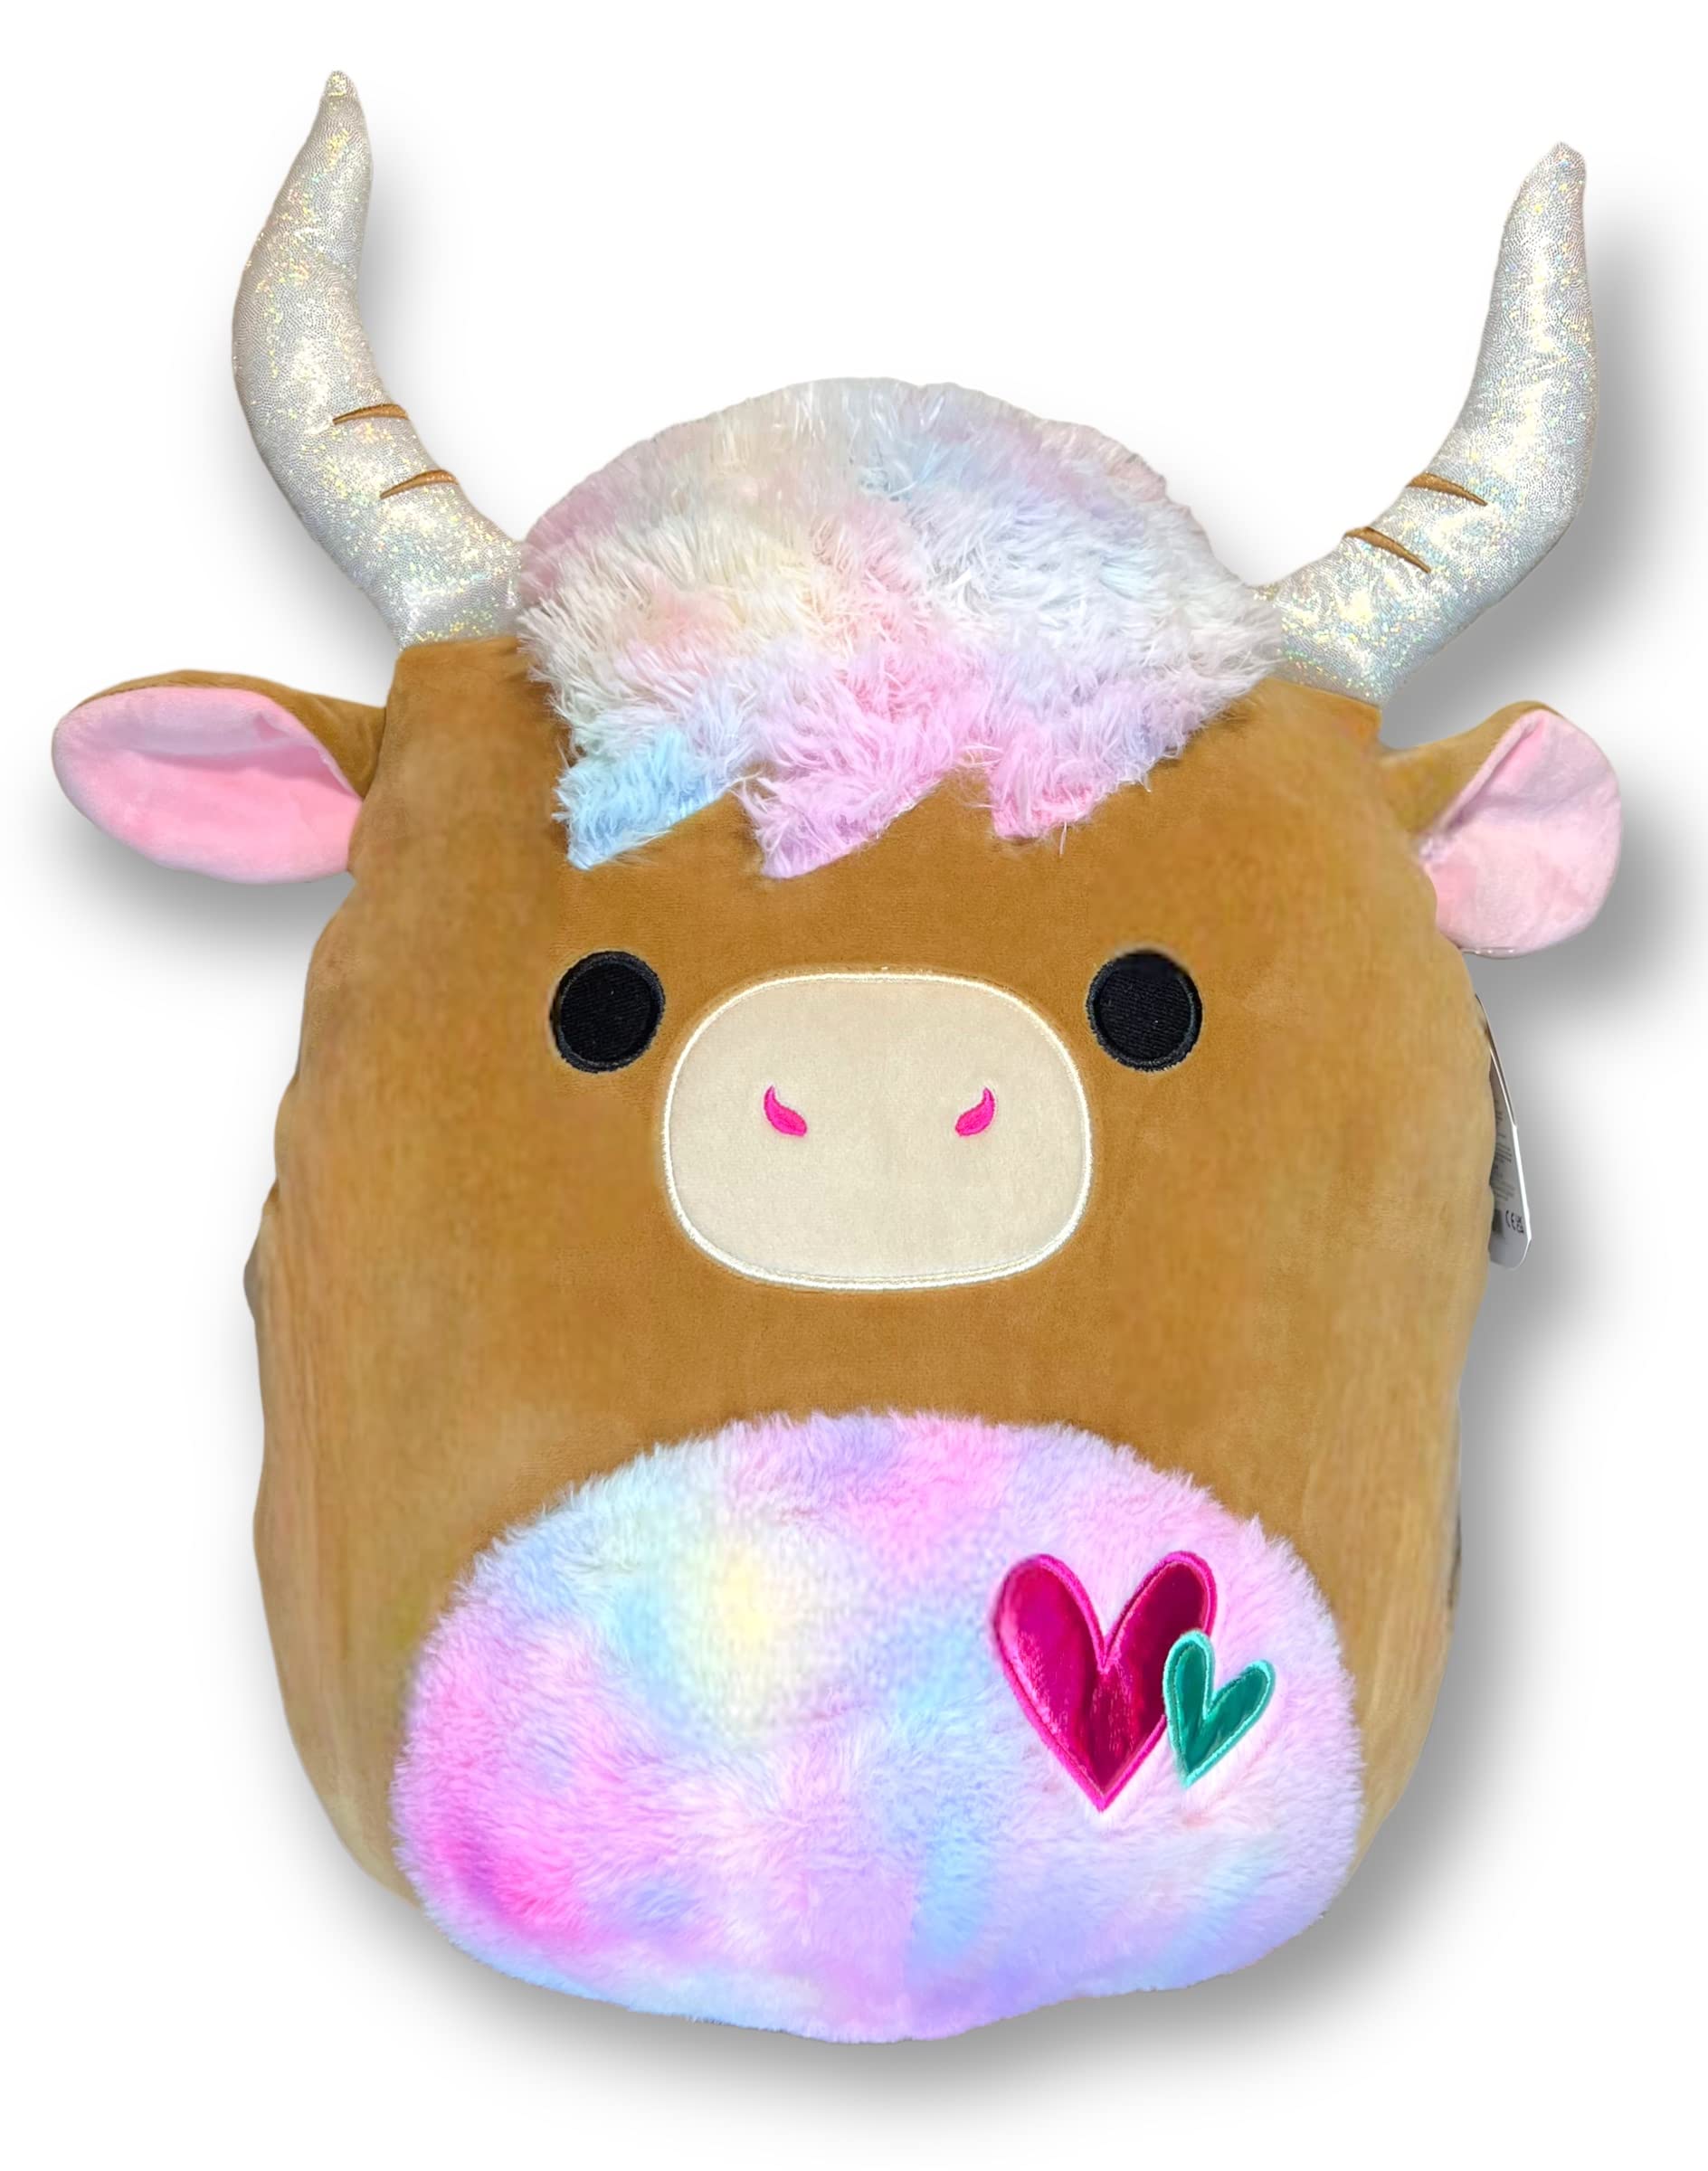 Squishmallows Official Kellytoy 16 Inch Candela Brown Highland Cow with Rainbow Fuzzy Mane and Belly - Pink Nostrils - 2023 Valentine's Squad Stuffed Animal Toy Pillow